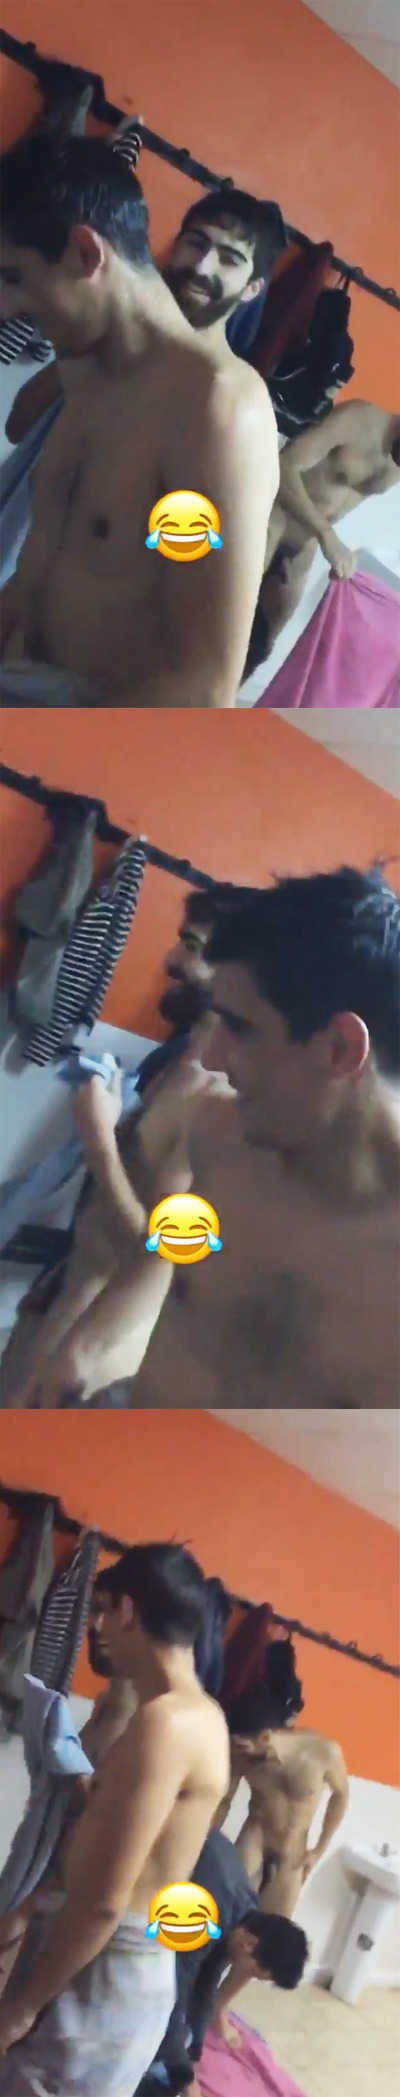 spanish footballers caught naked while recording video in locker room